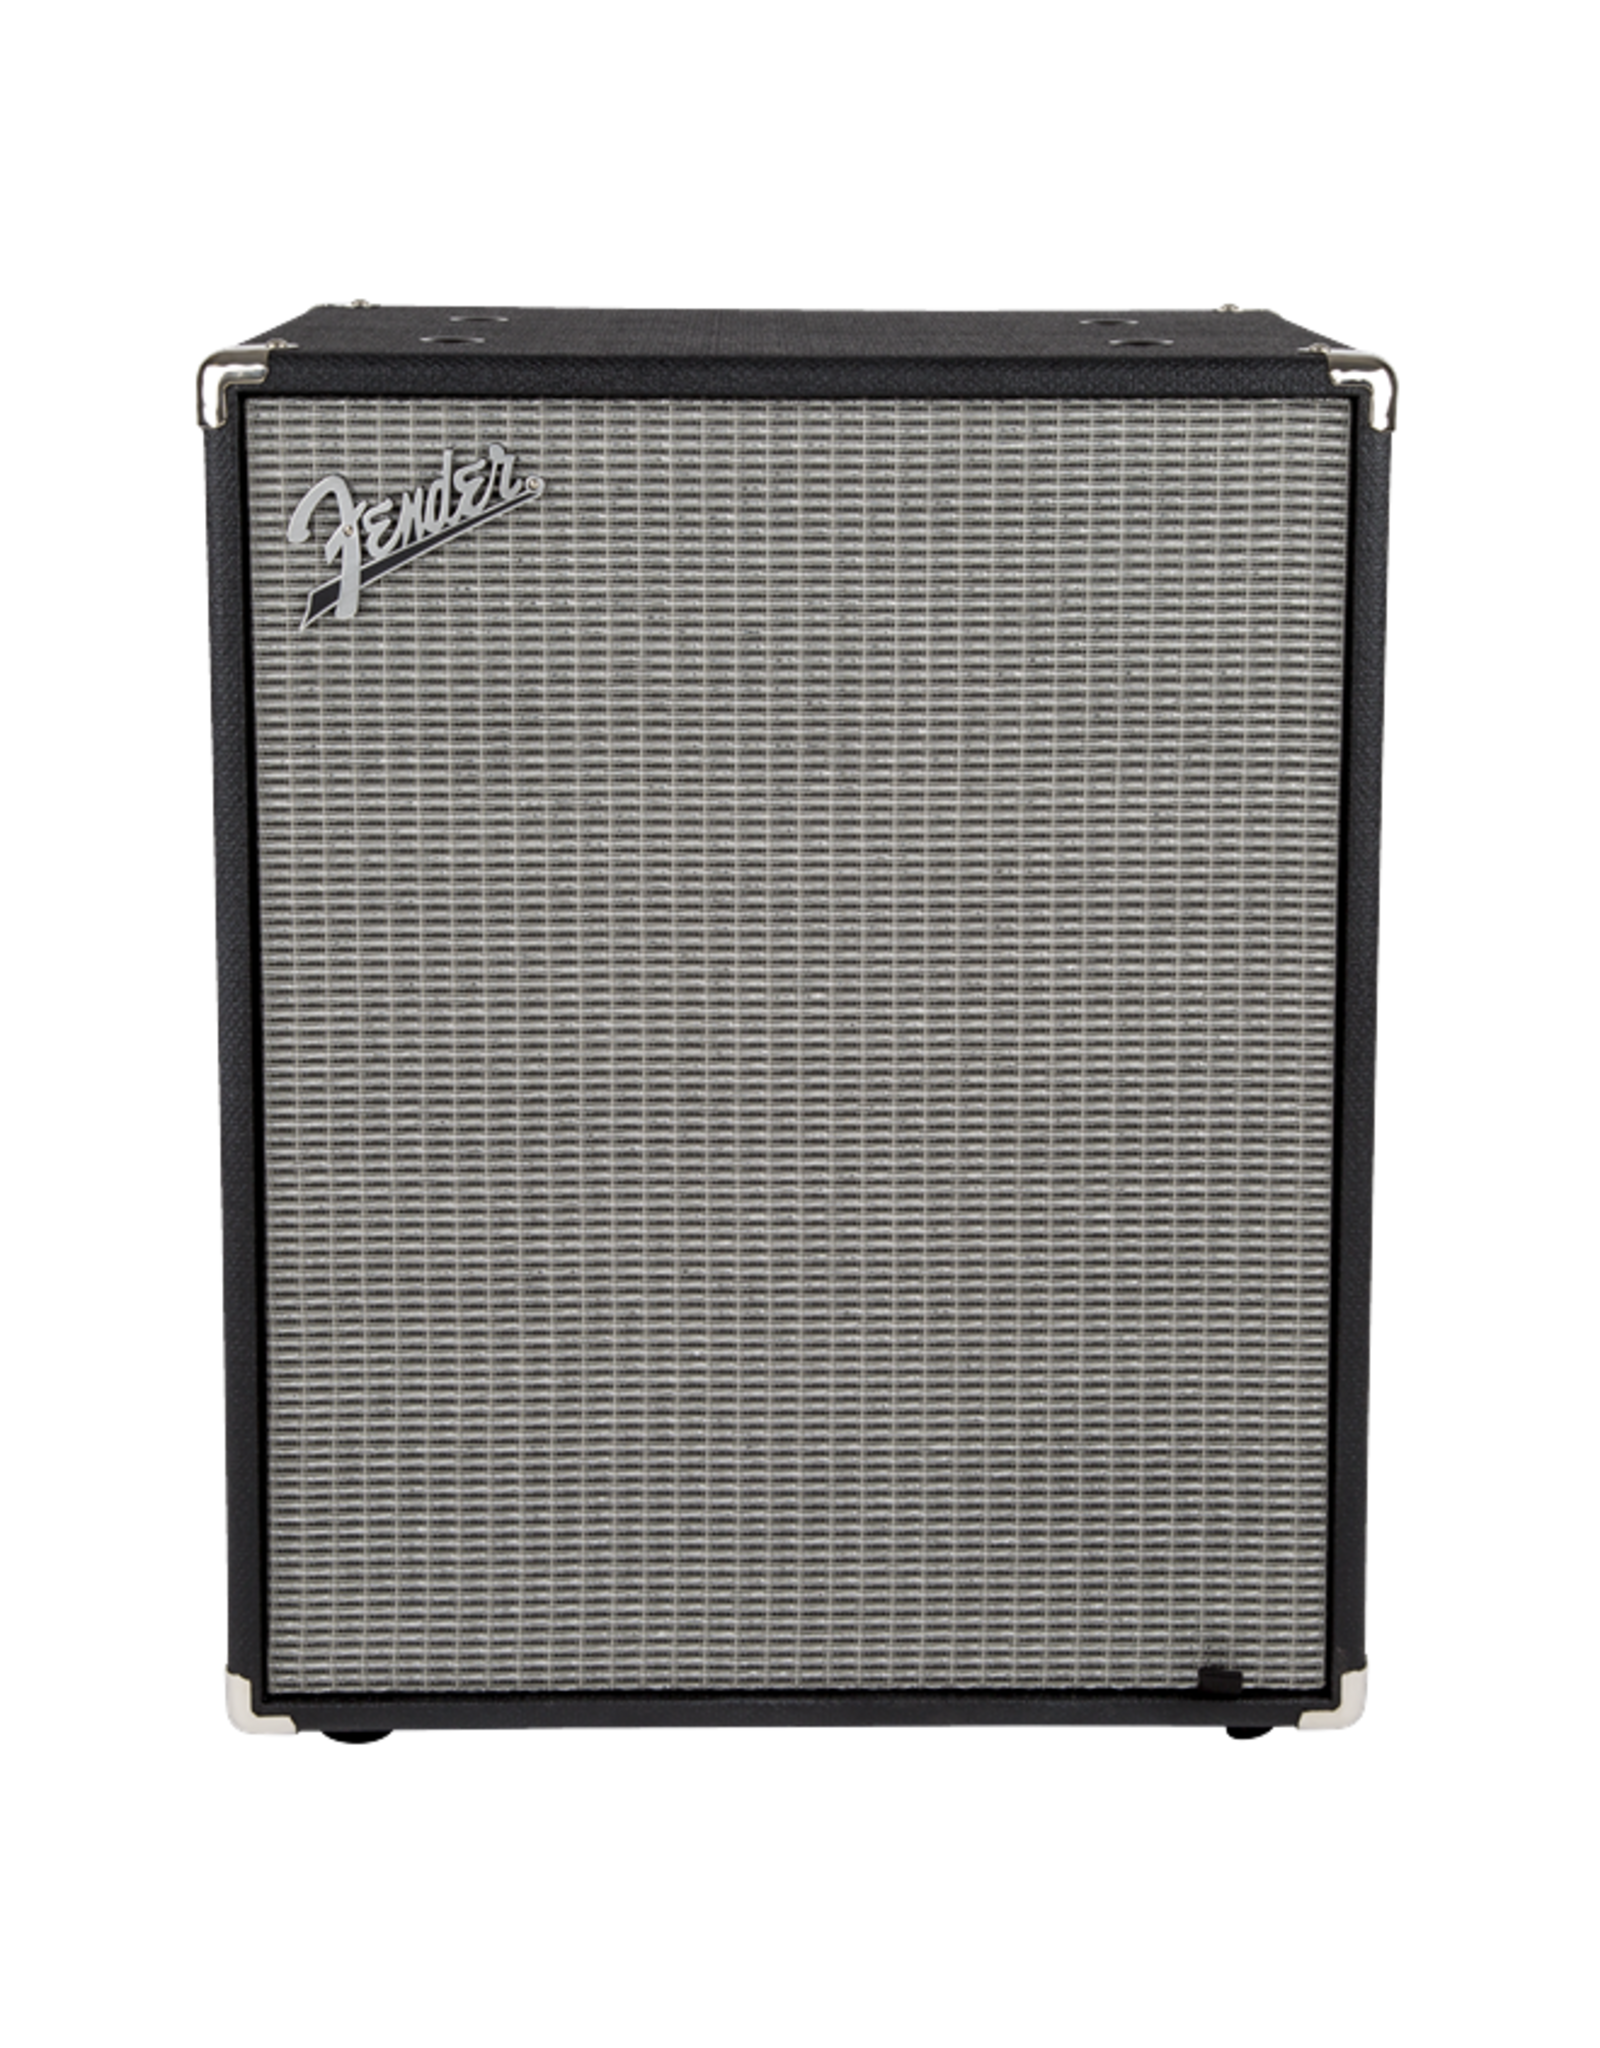 Fender Fender Rumble 210 Cabinet, Black and Silver